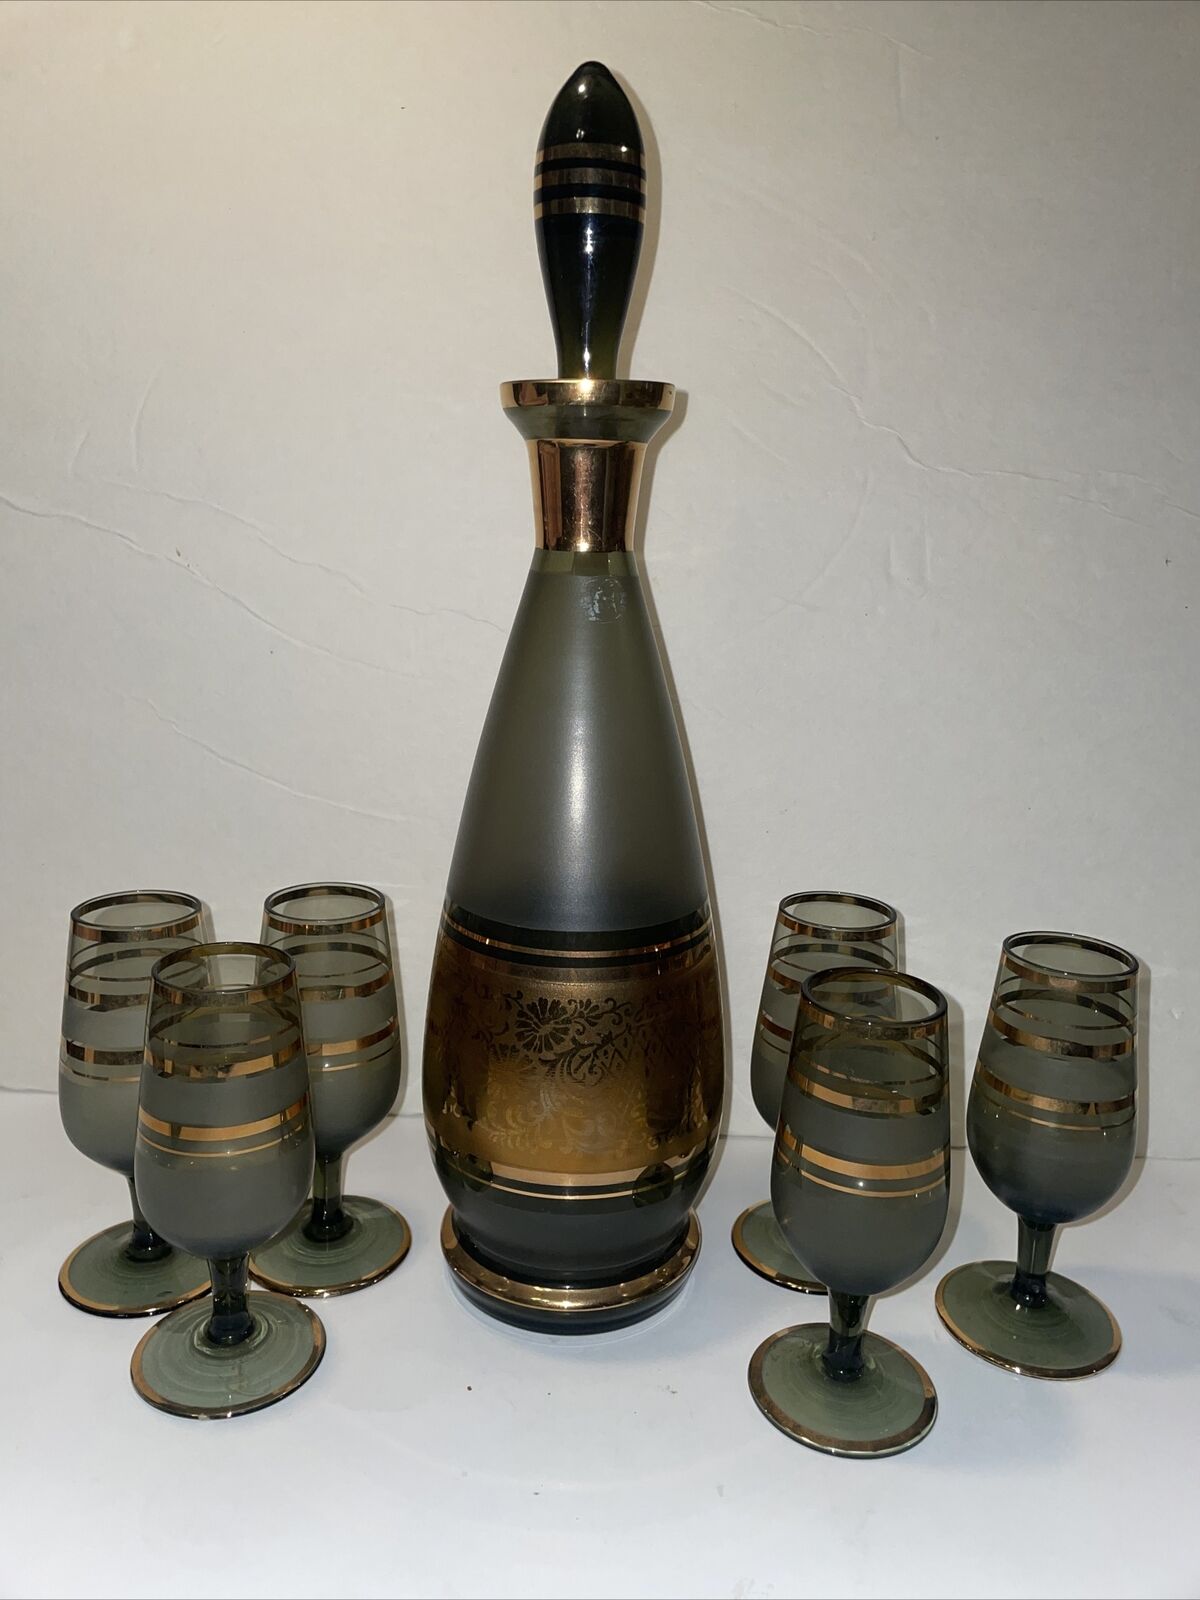 Bohemia Czech Smoked Glass Decanter and 6 Glasses 1950s Estate Vintage Set